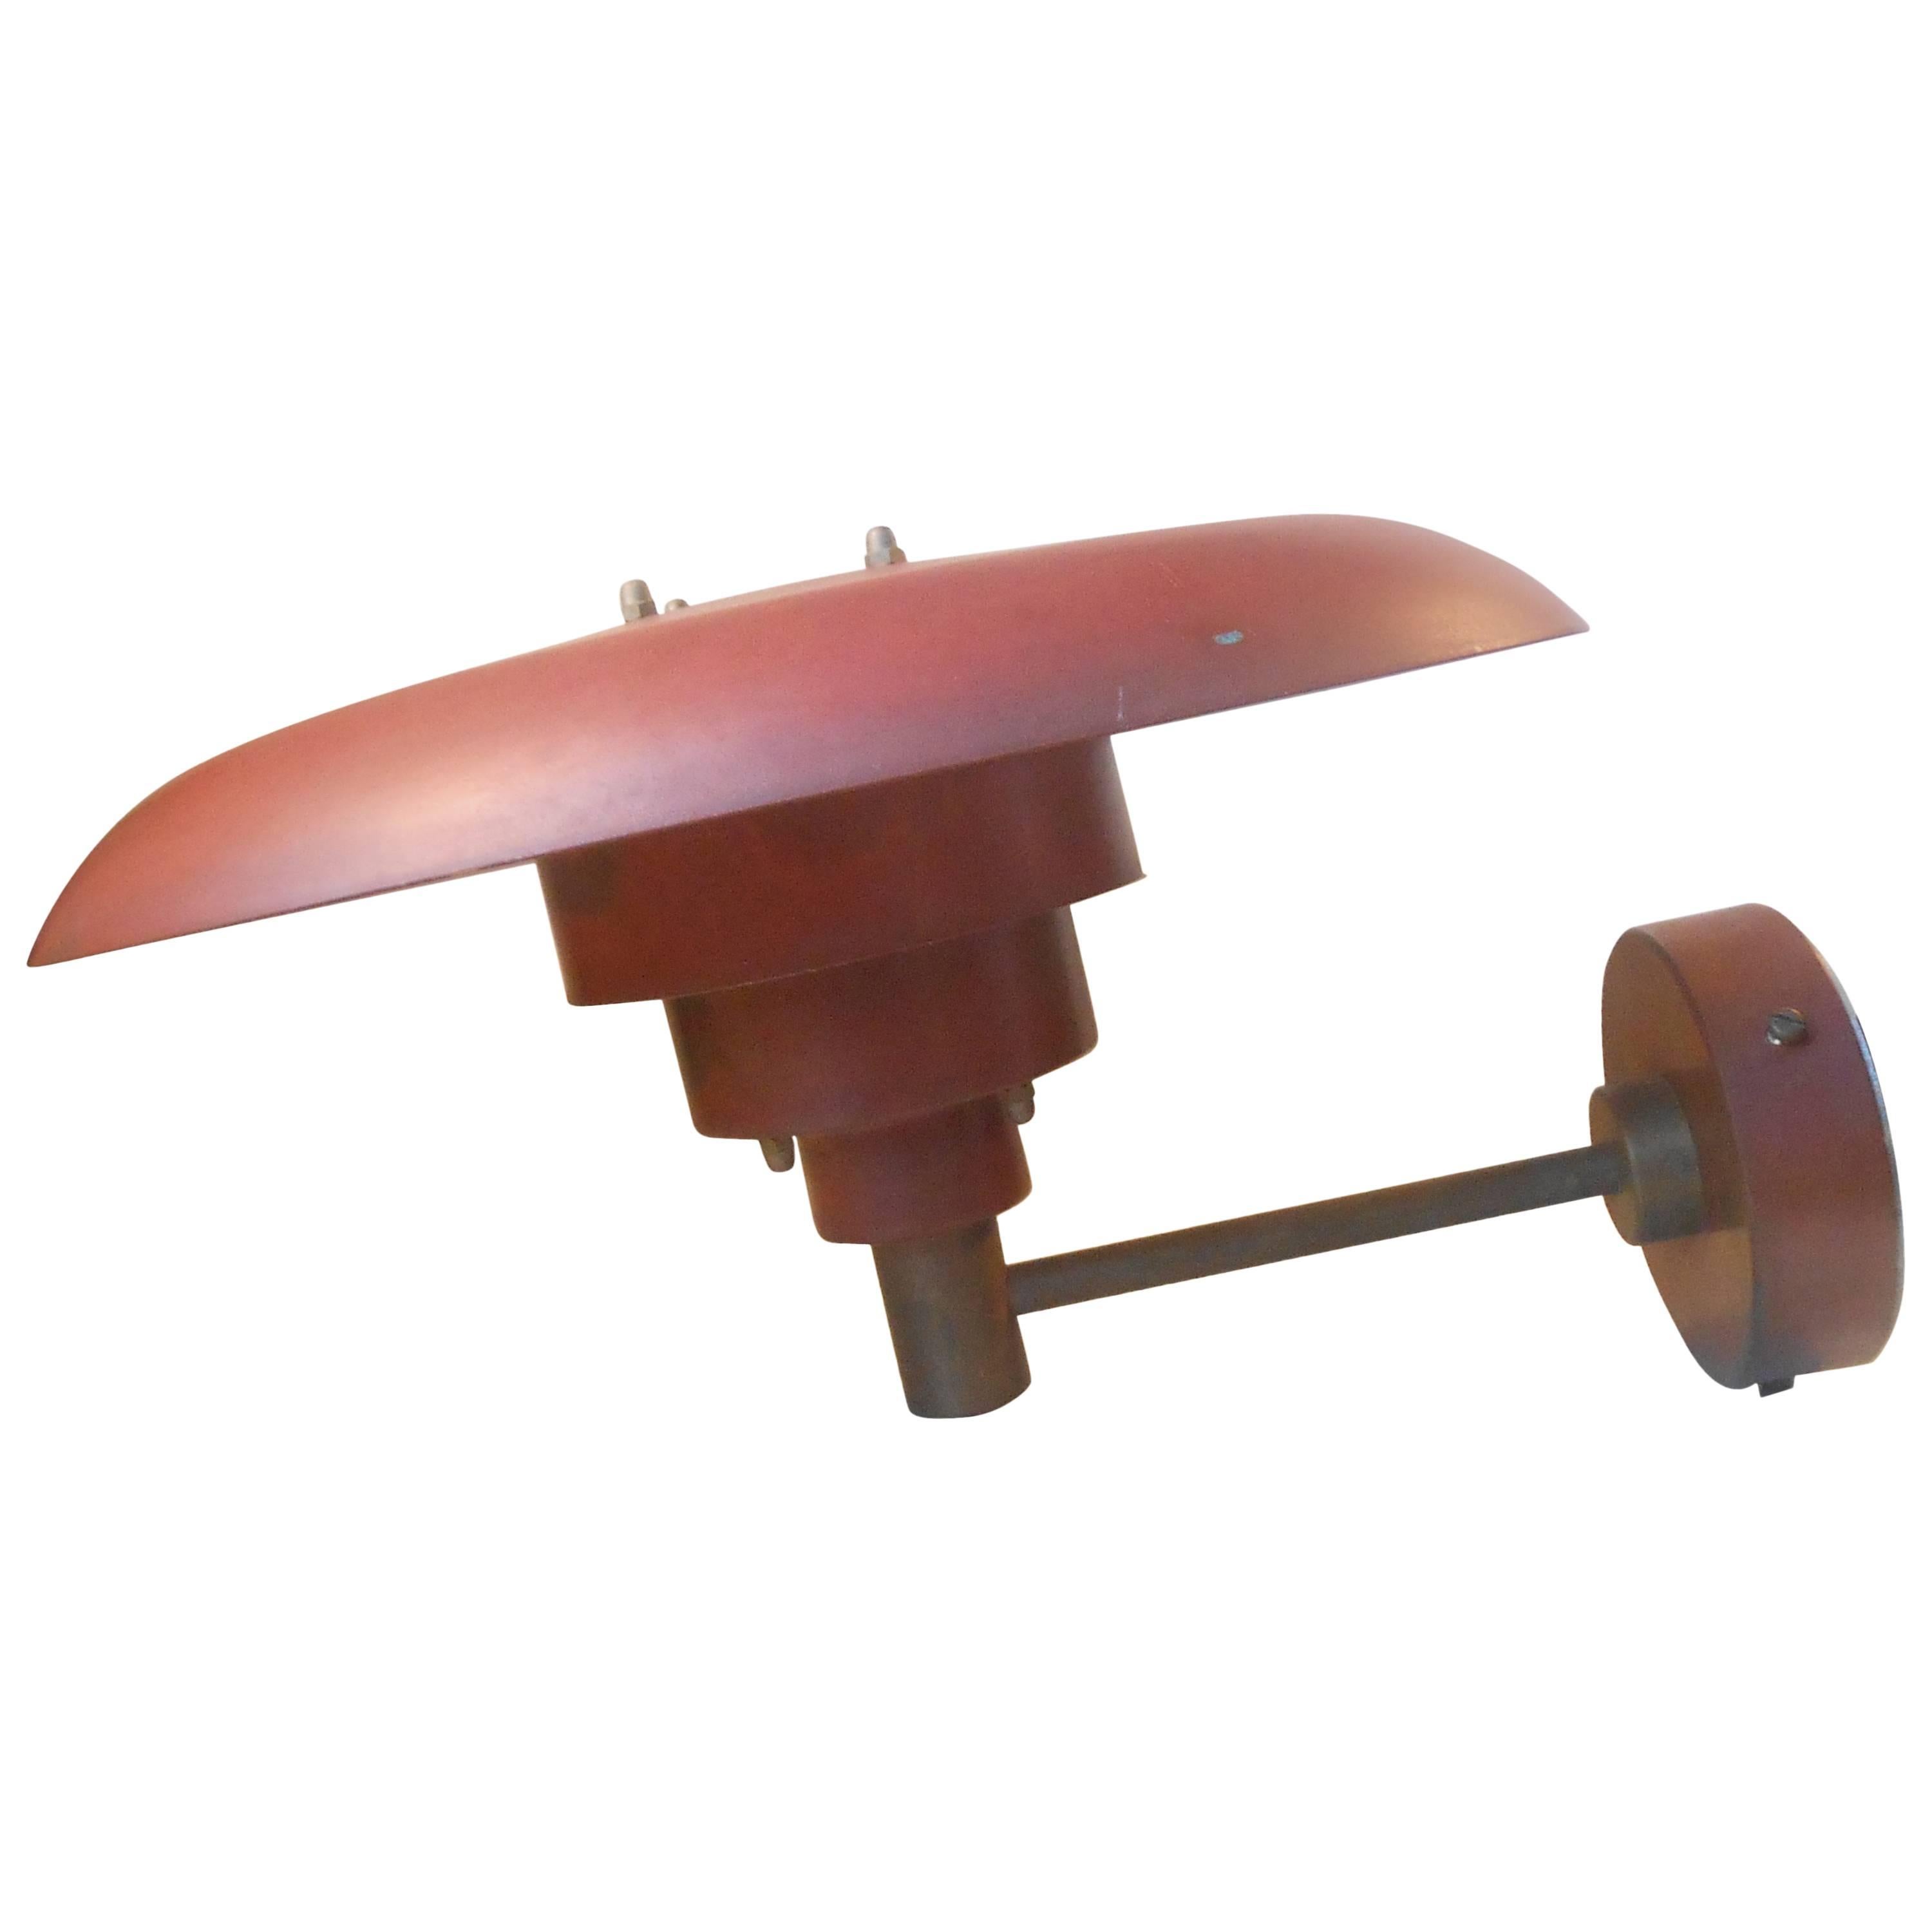 Very Rare Lyfa Outdoor Wall Light in Red Verdigris Copper in the Manner of PH